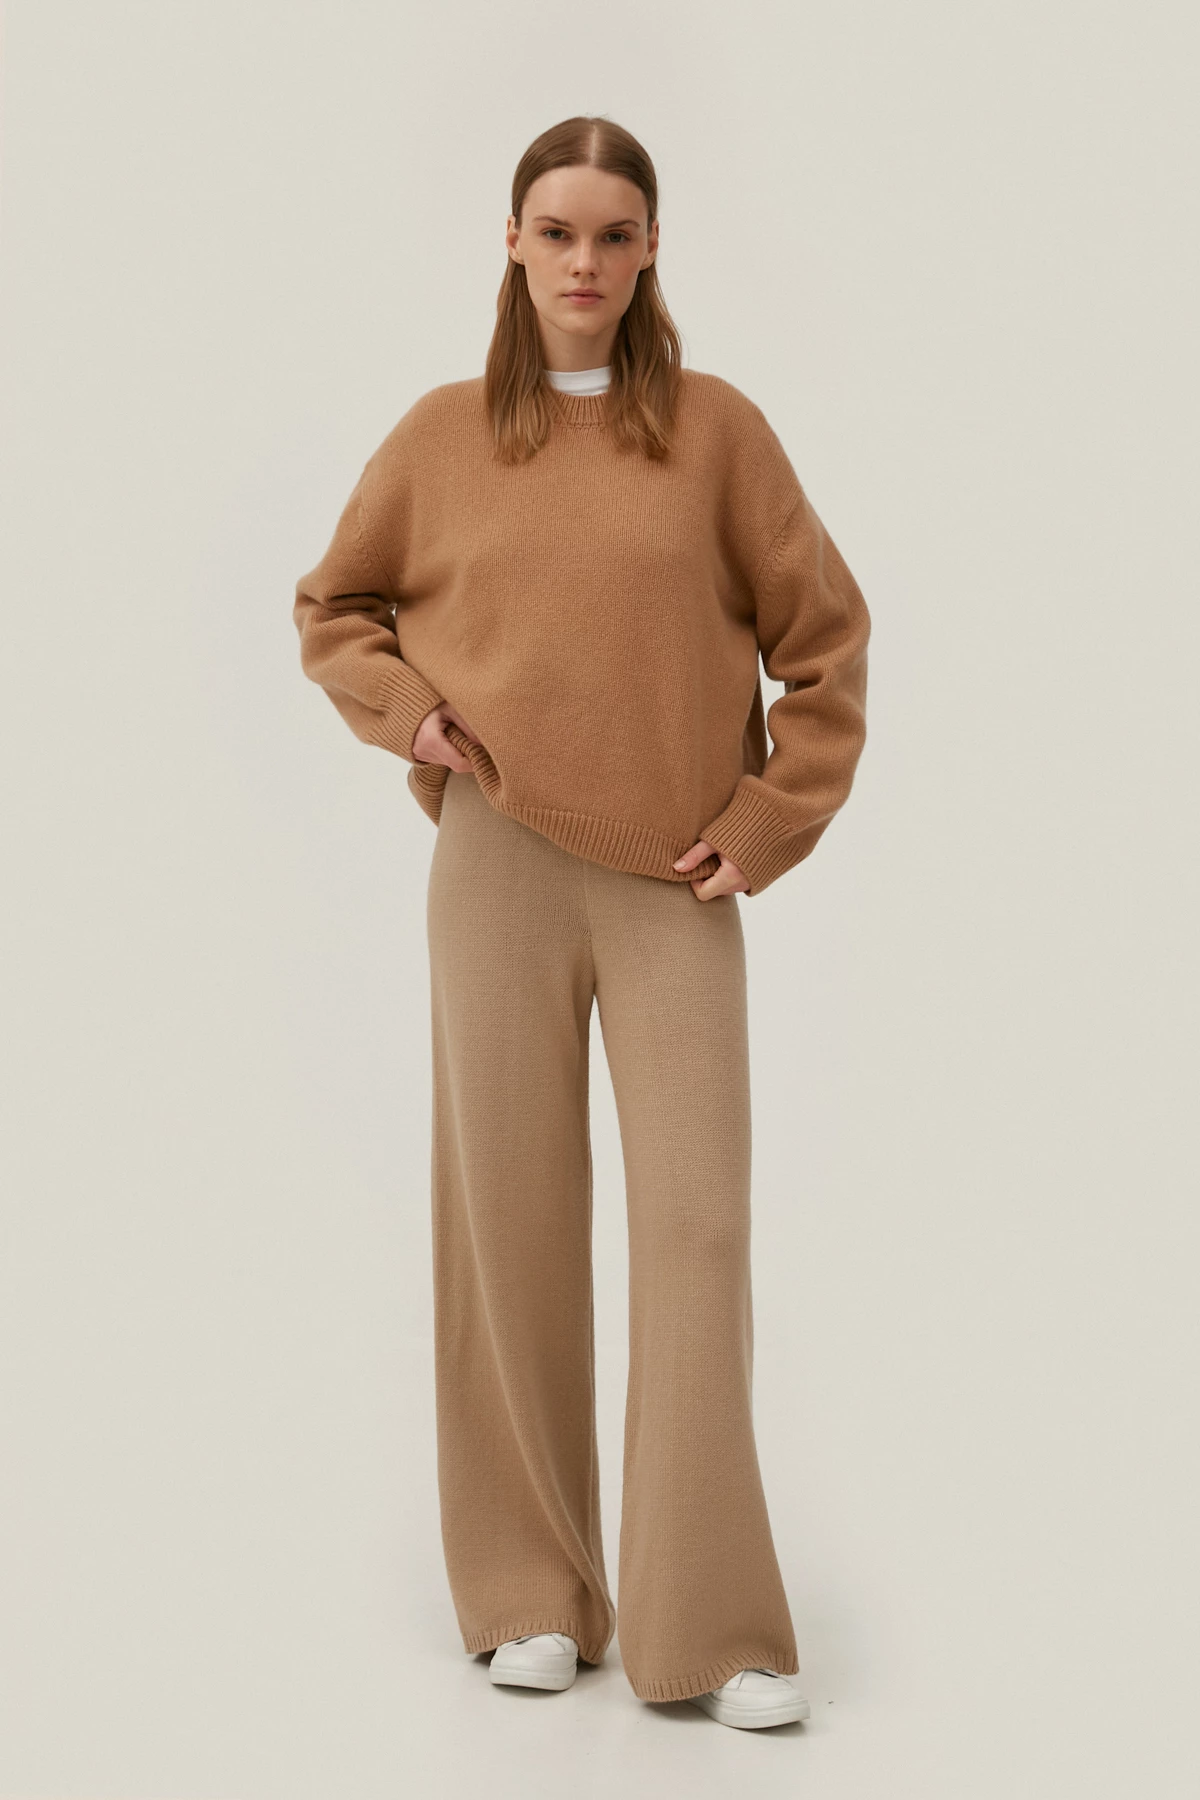 Beige knitted elongated pants with merino wool, photo 1